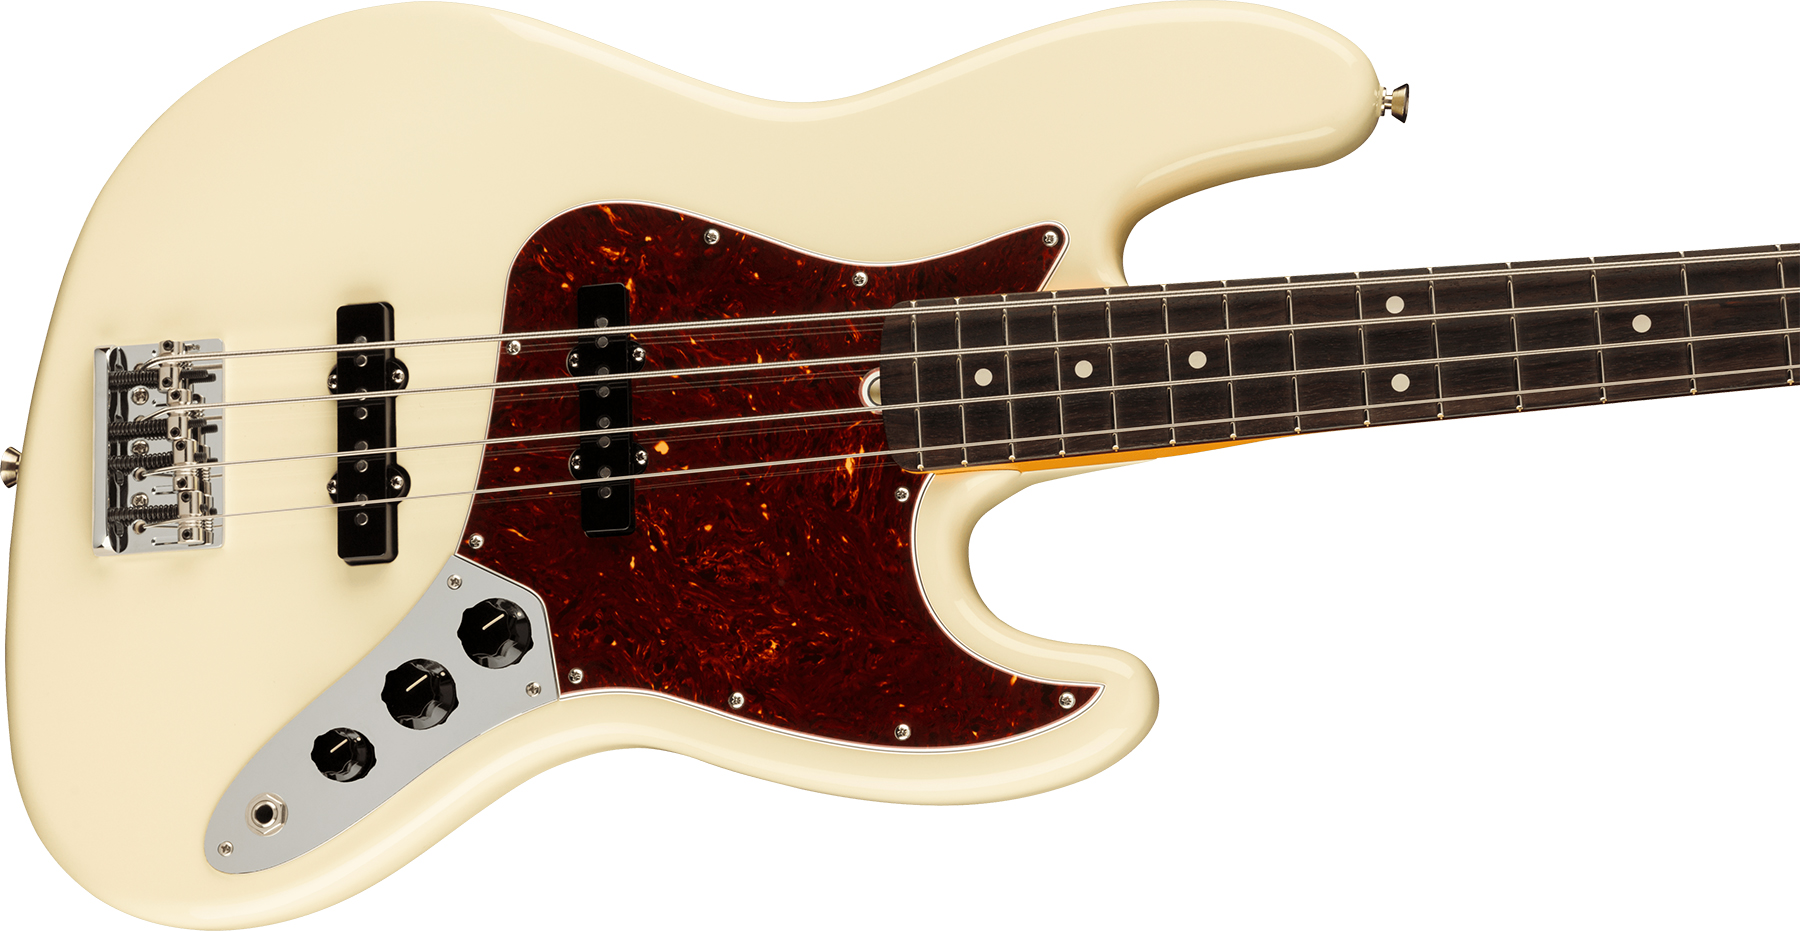 Fender Jazz Bass American Professional Ii Lh Gaucher Usa Rw - Olympic White - Basse Électrique Solid Body - Variation 2